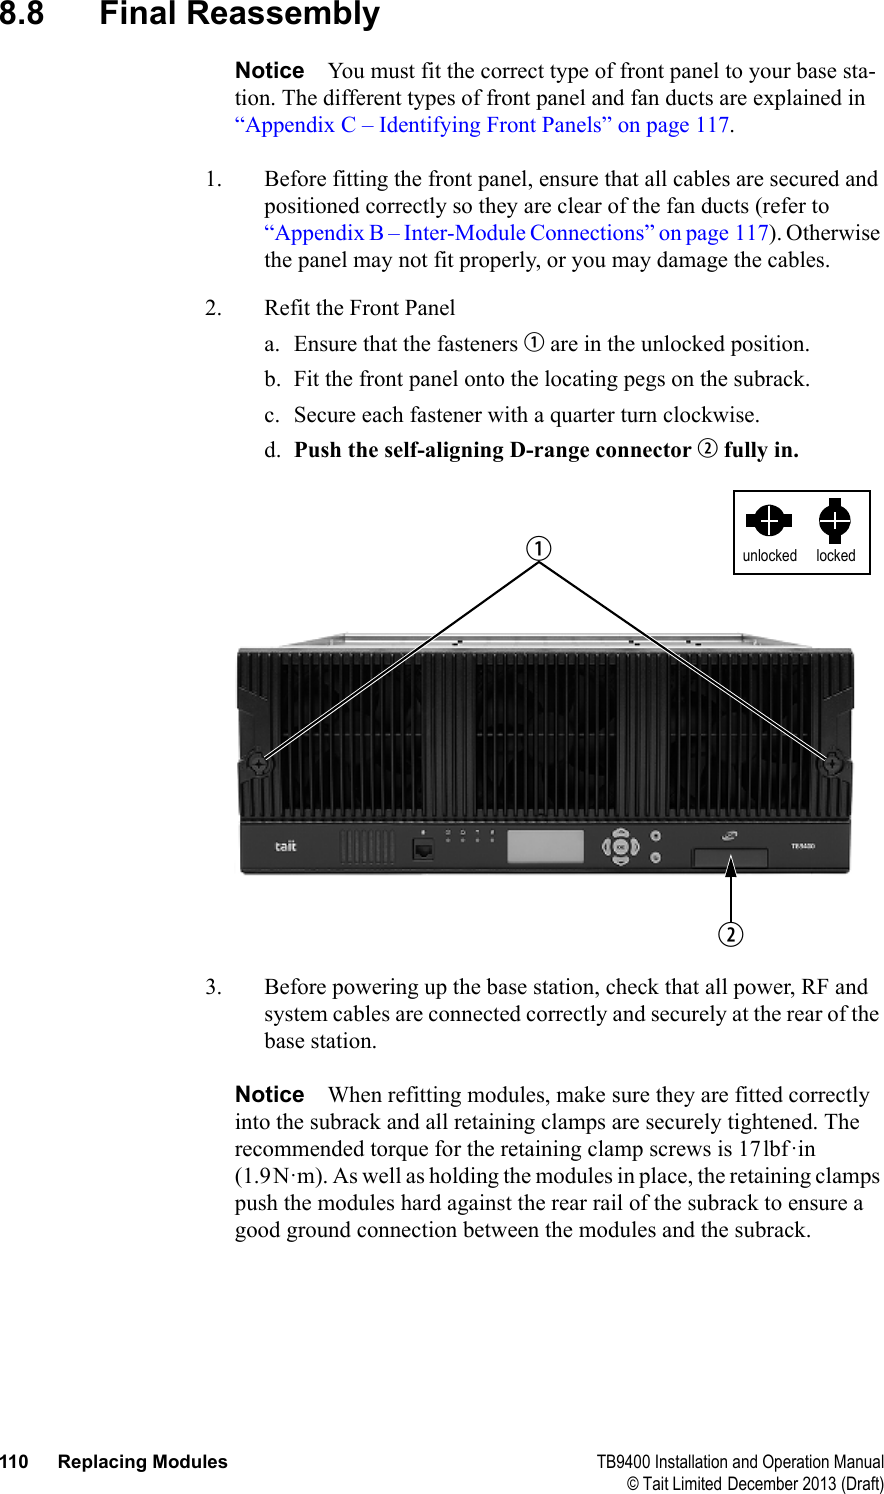  110 Replacing Modules TB9400 Installation and Operation Manual© Tait Limited December 2013 (Draft)8.8 Final ReassemblyNotice You must fit the correct type of front panel to your base sta-tion. The different types of front panel and fan ducts are explained in “Appendix C – Identifying Front Panels” on page 117.1. Before fitting the front panel, ensure that all cables are secured and positioned correctly so they are clear of the fan ducts (refer to “Appendix B – Inter-Module Connections” on page 117). Otherwise the panel may not fit properly, or you may damage the cables.2. Refit the Front Panela. Ensure that the fasteners b are in the unlocked position.b. Fit the front panel onto the locating pegs on the subrack. c. Secure each fastener with a quarter turn clockwise.d. Push the self-aligning D-range connector c fully in.3. Before powering up the base station, check that all power, RF and system cables are connected correctly and securely at the rear of the base station.Notice When refitting modules, make sure they are fitted correctly into the subrack and all retaining clamps are securely tightened. The recommended torque for the retaining clamp screws is 17lbf·in (1.9N·m). As well as holding the modules in place, the retaining clamps push the modules hard against the rear rail of the subrack to ensure a good ground connection between the modules and the subrack.lockedunlockedbc